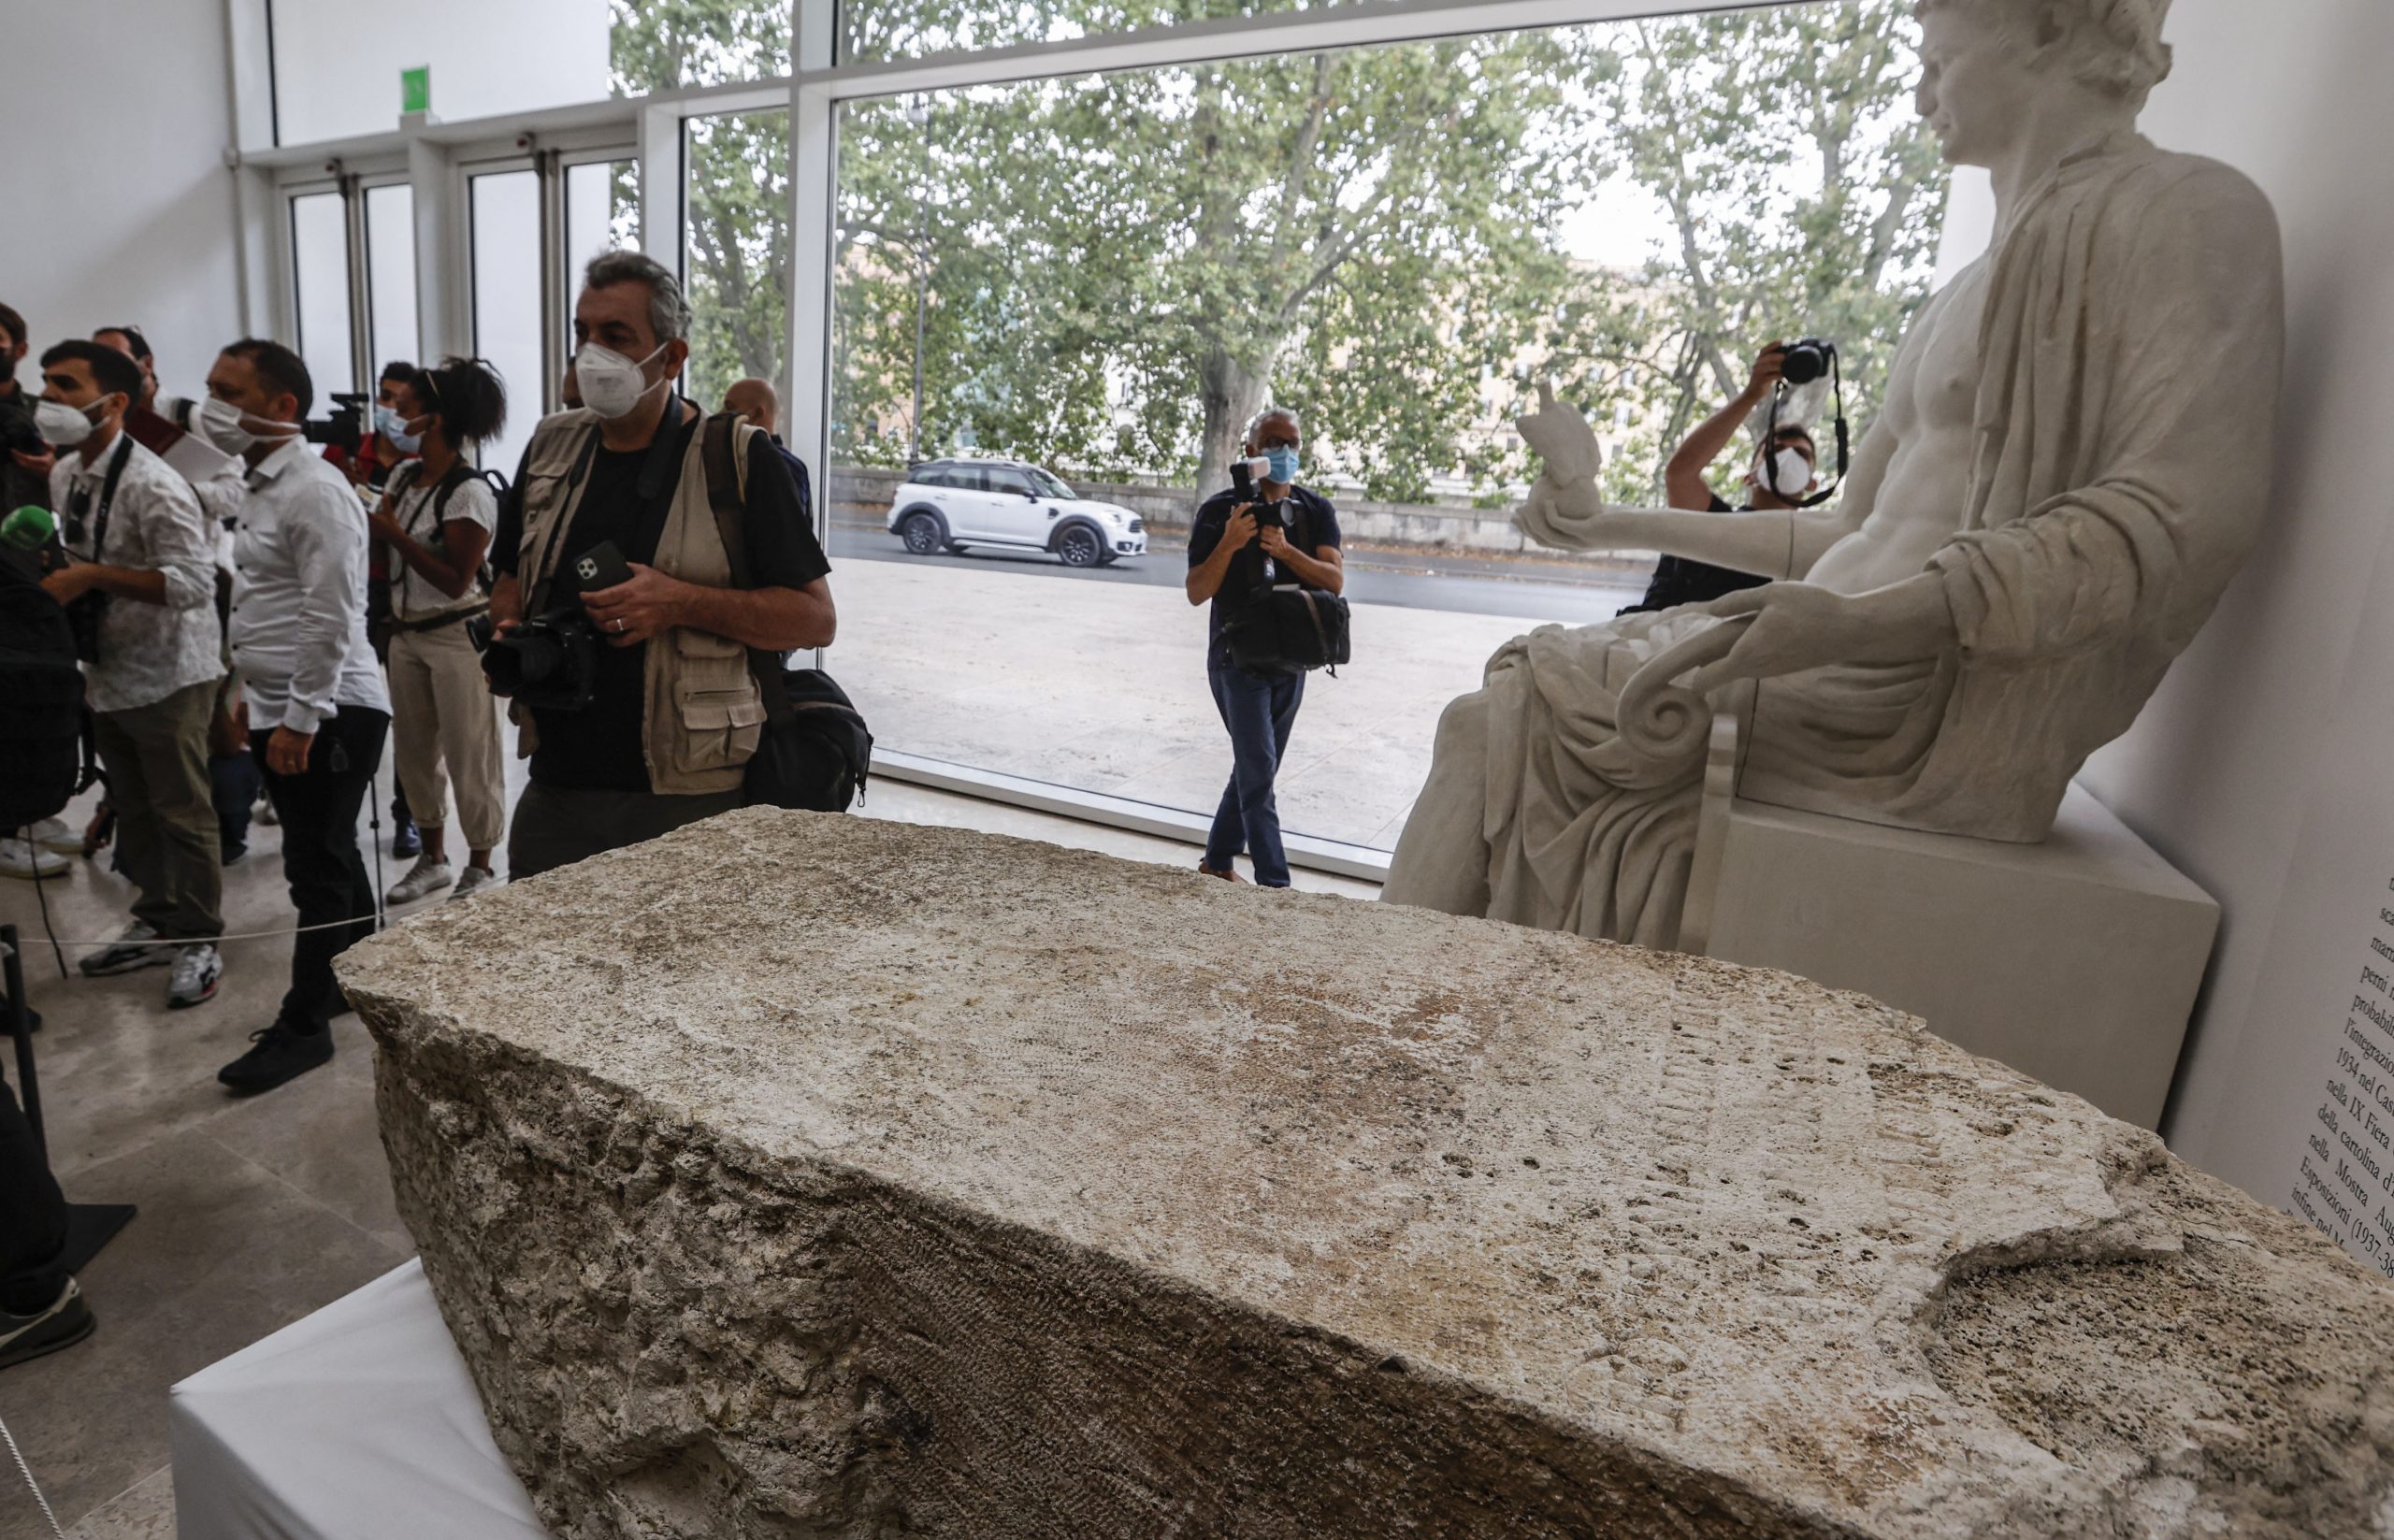 Archaeological finds from the reign of Emperor Claudius have been found in Rome